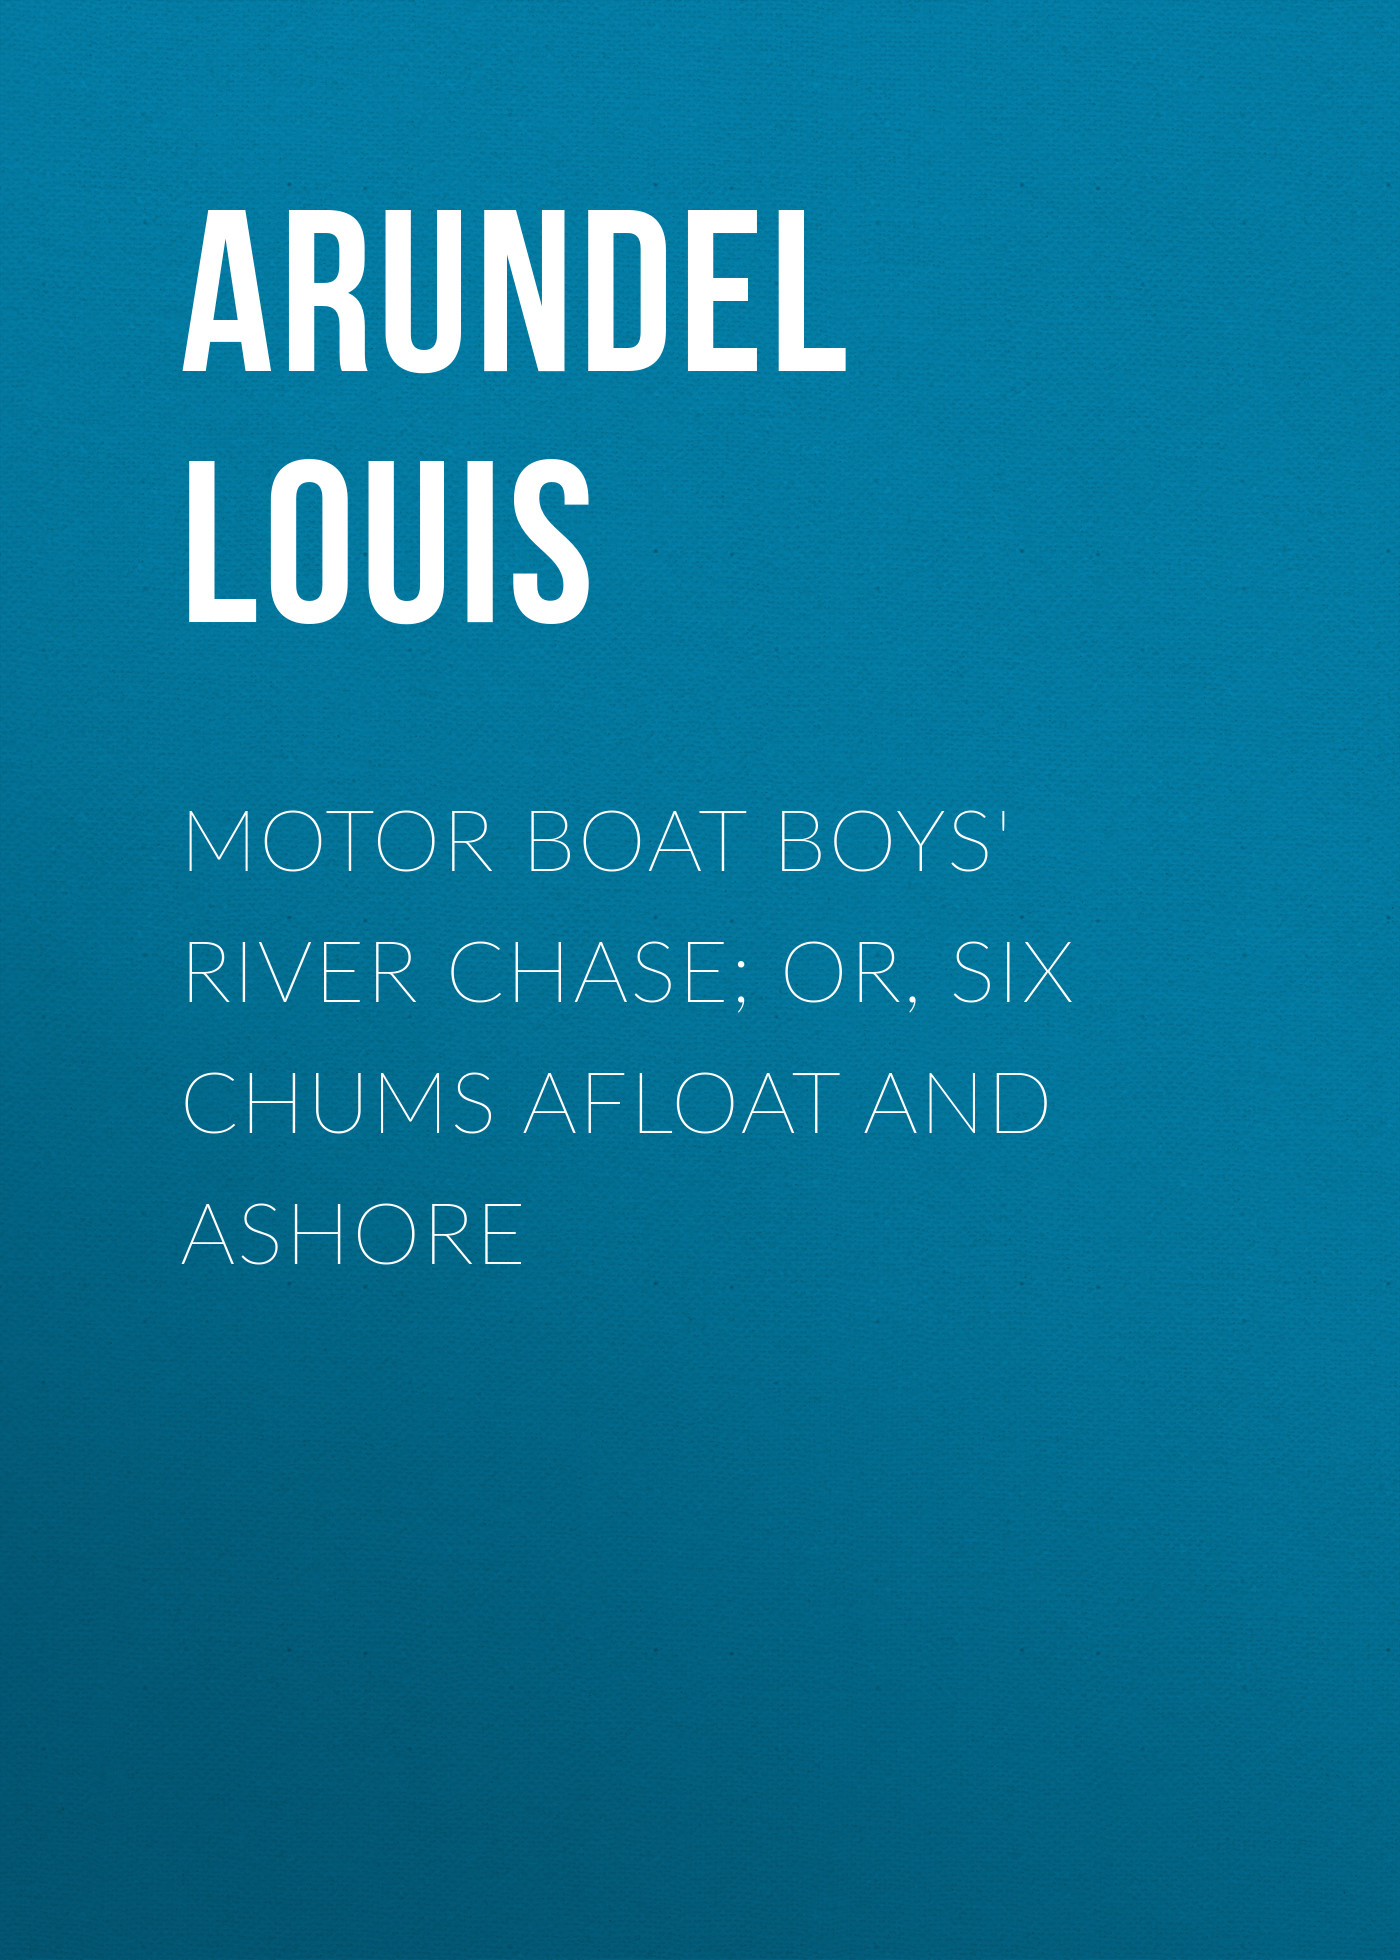 Motor Boat Boys'River Chase; or, Six Chums Afloat and Ashore